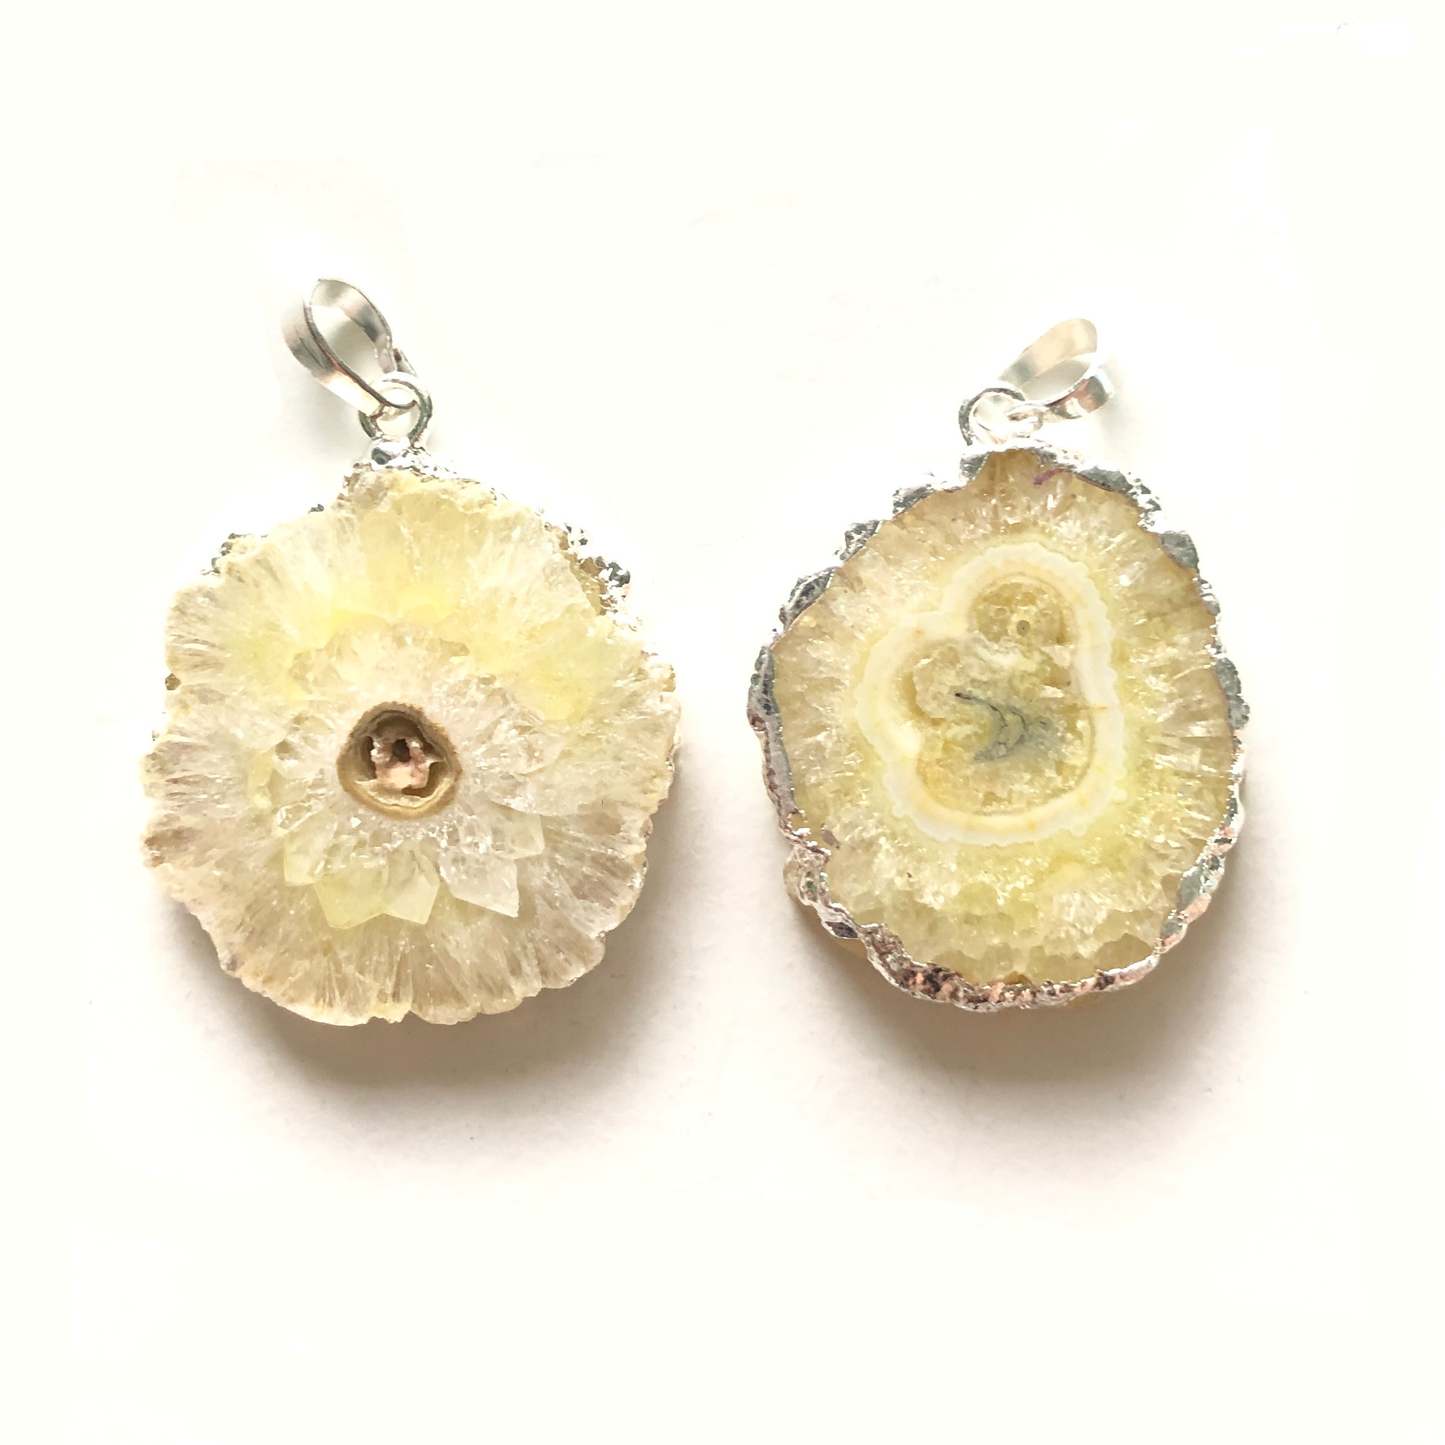 1PC 30-40mm Half Silver Plated Natural Sunflower Agate Charm-Premium Quality Yellow on Silver Stone Charms Charms Beads Beyond